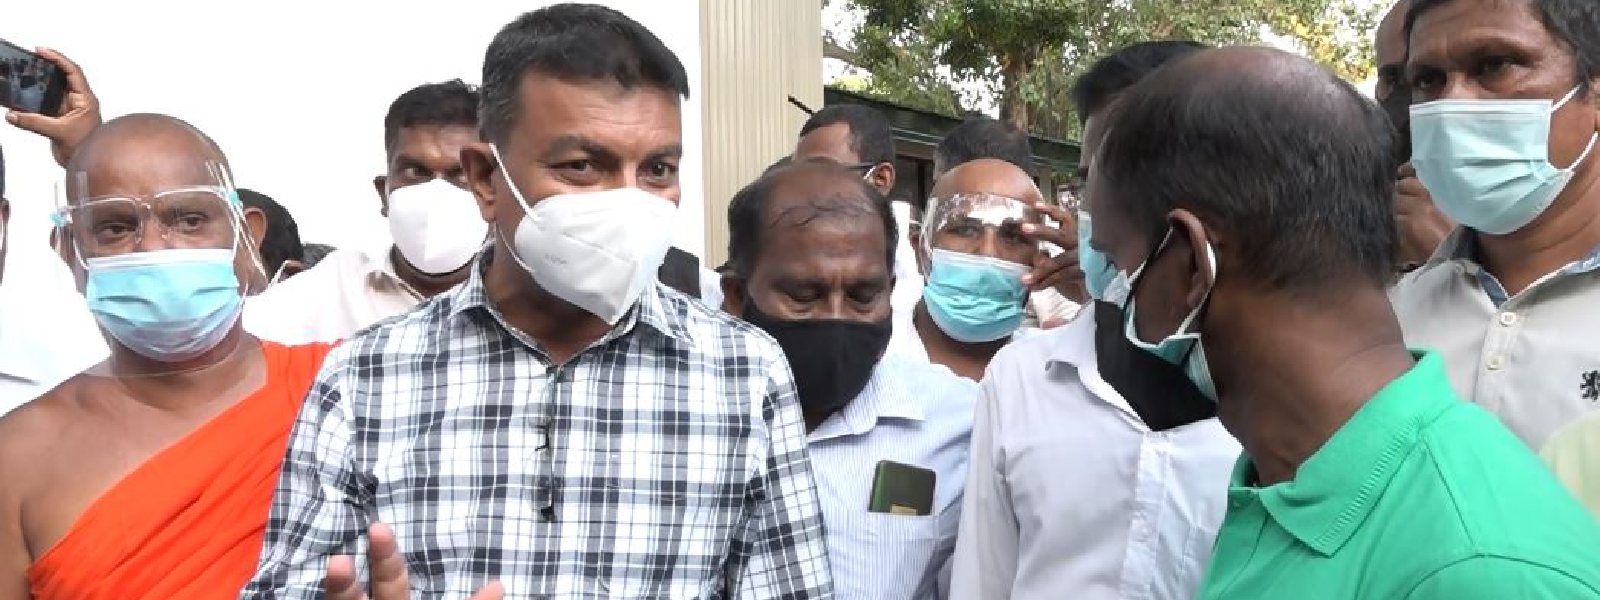 44 Teachers & Principals granted bail; They were arrested for protesting in Colombo